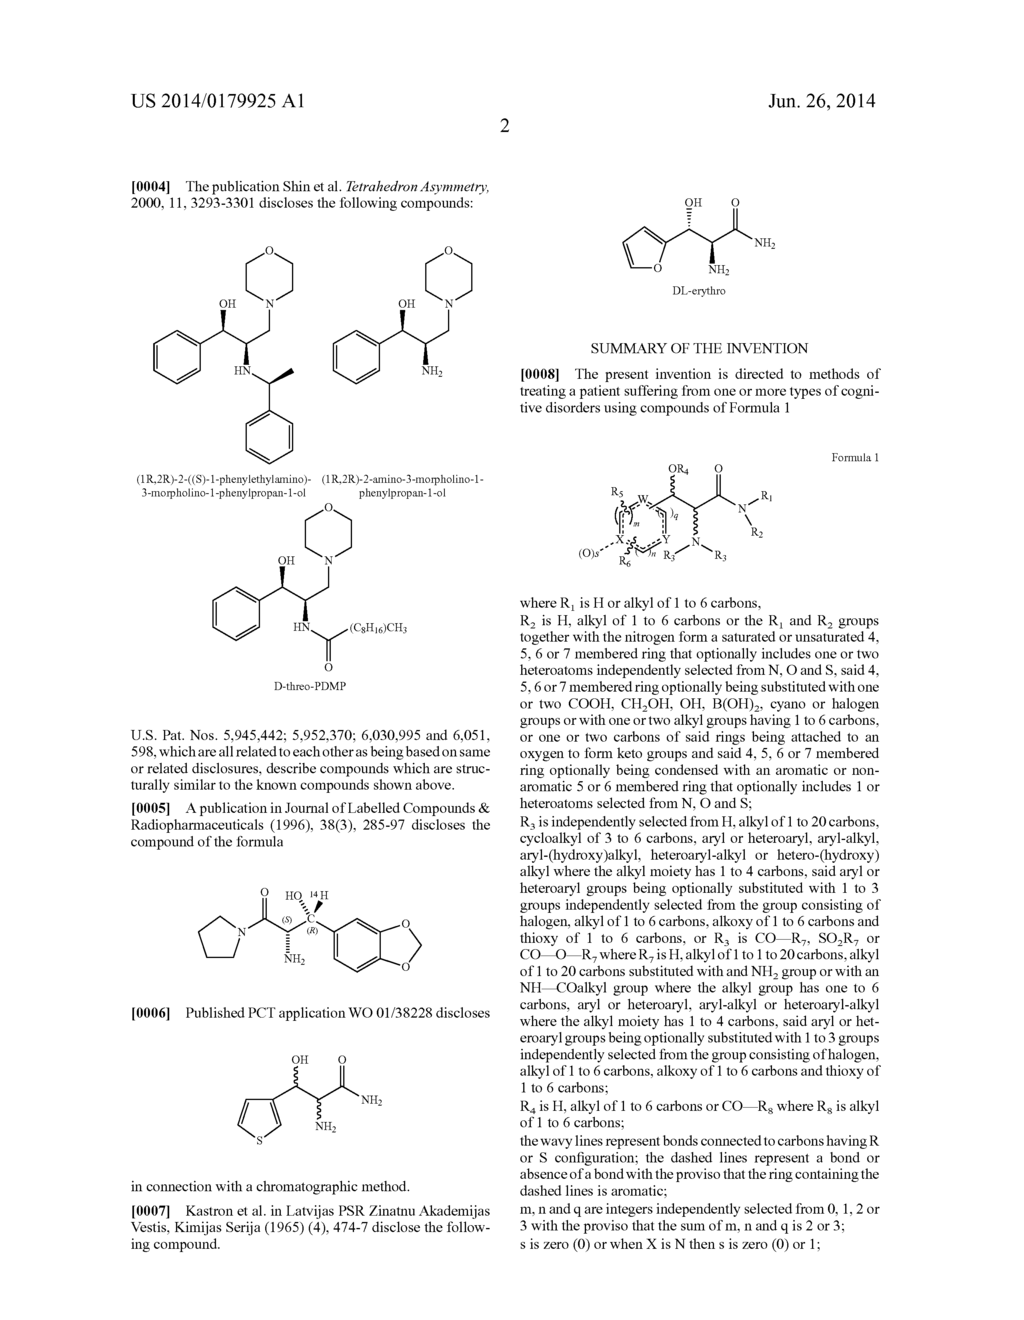 METHODS FOR TREATING COGNITIVE DISORDERS USING     3-ARYL-3-HYDROXY-2-AMINO-PROPIONIC ACID AMIDES,     3-HETEROARYL-3-HYDROXY-2-AMINO-PROPIONIC ACID AMIDES AND RELATED     COMPOUNDS - diagram, schematic, and image 03